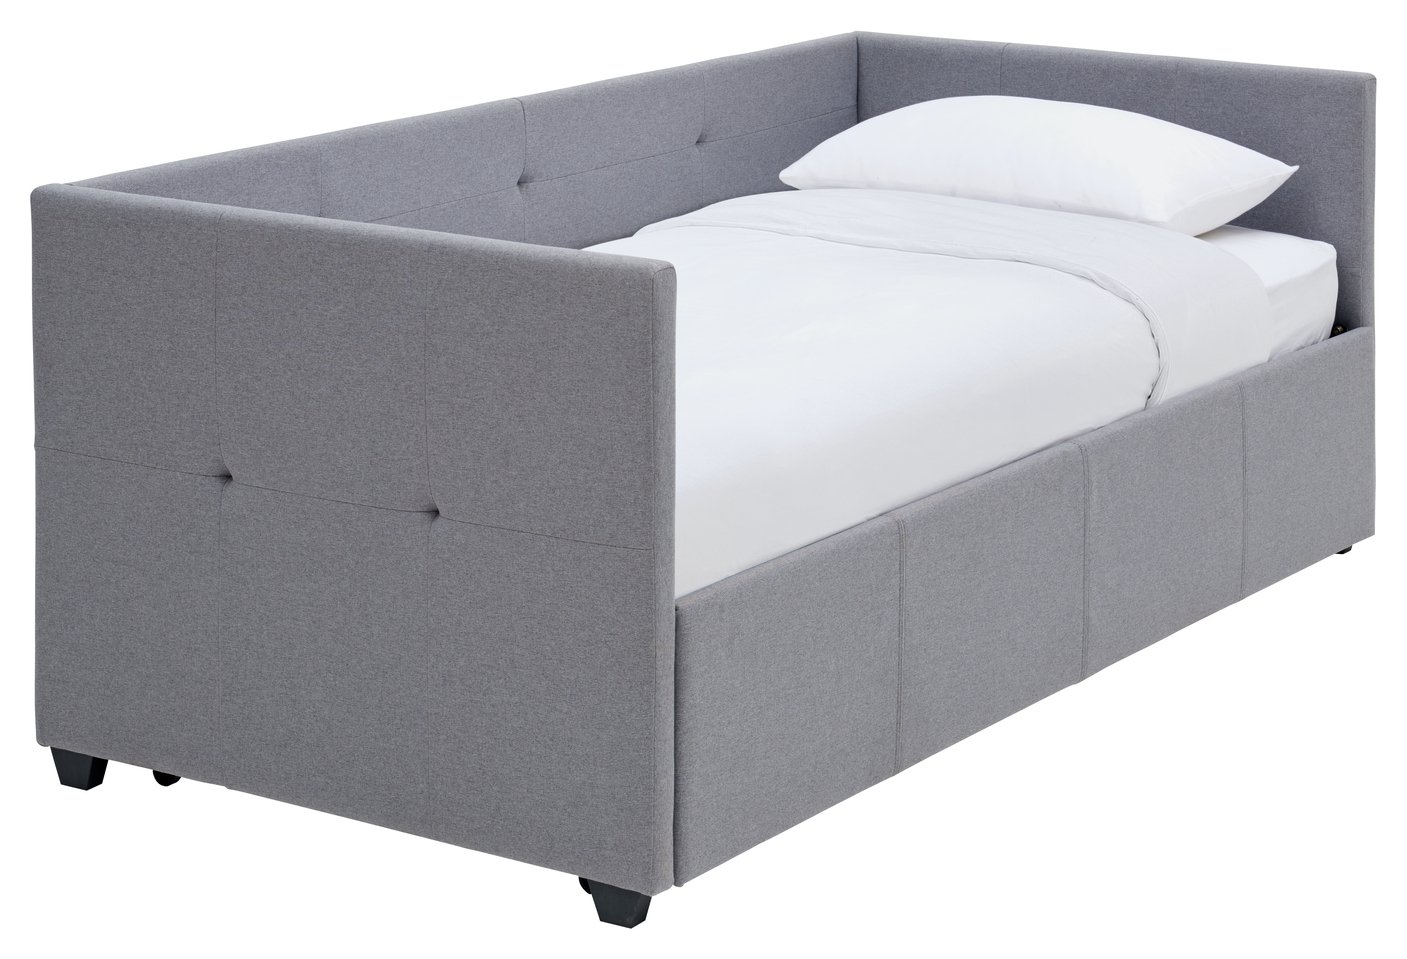 Argos Home Tamara Day Bed with Trundle & 2 Mattresses - Grey